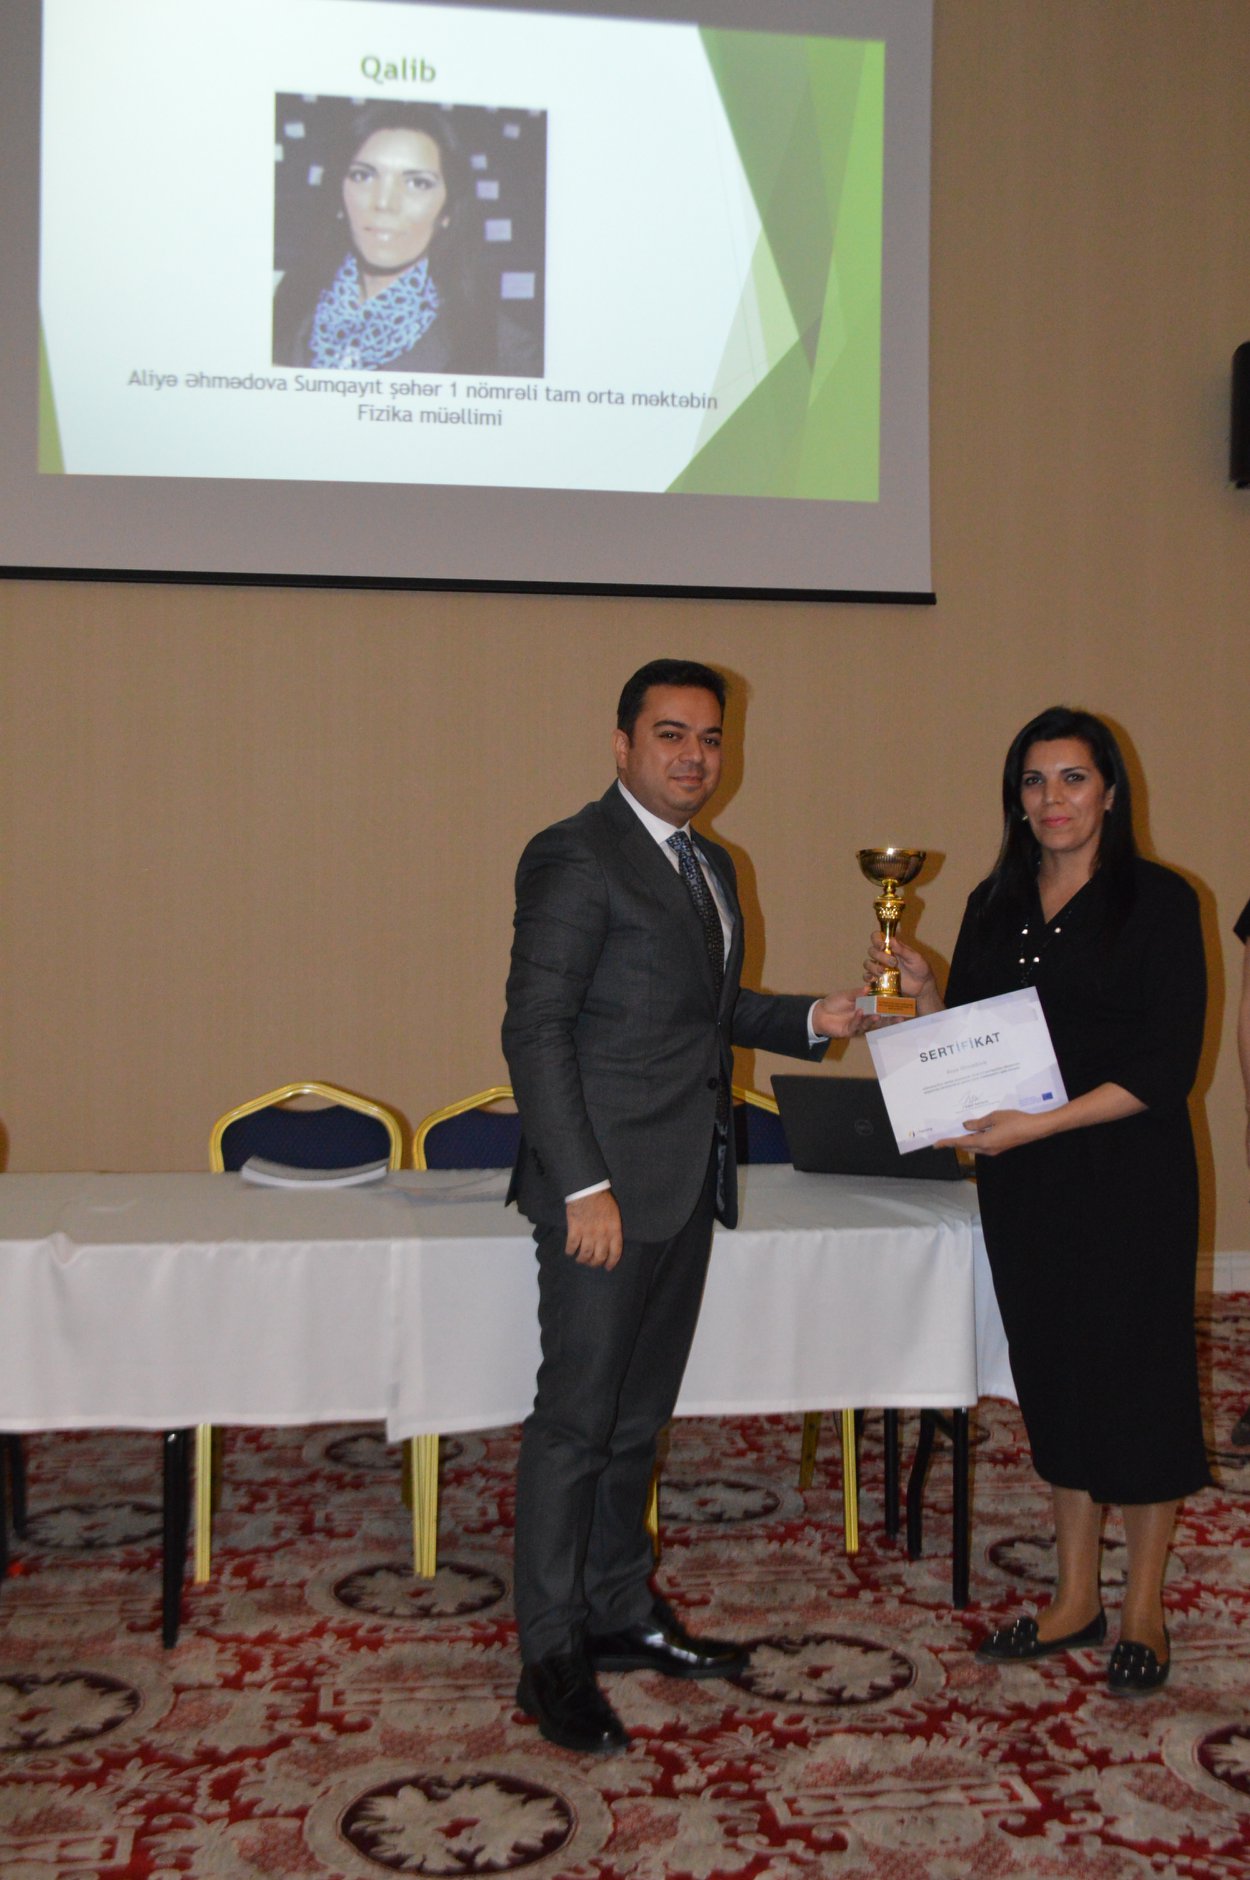 eTwinning Plus Azerbaijan held the first Local Competition